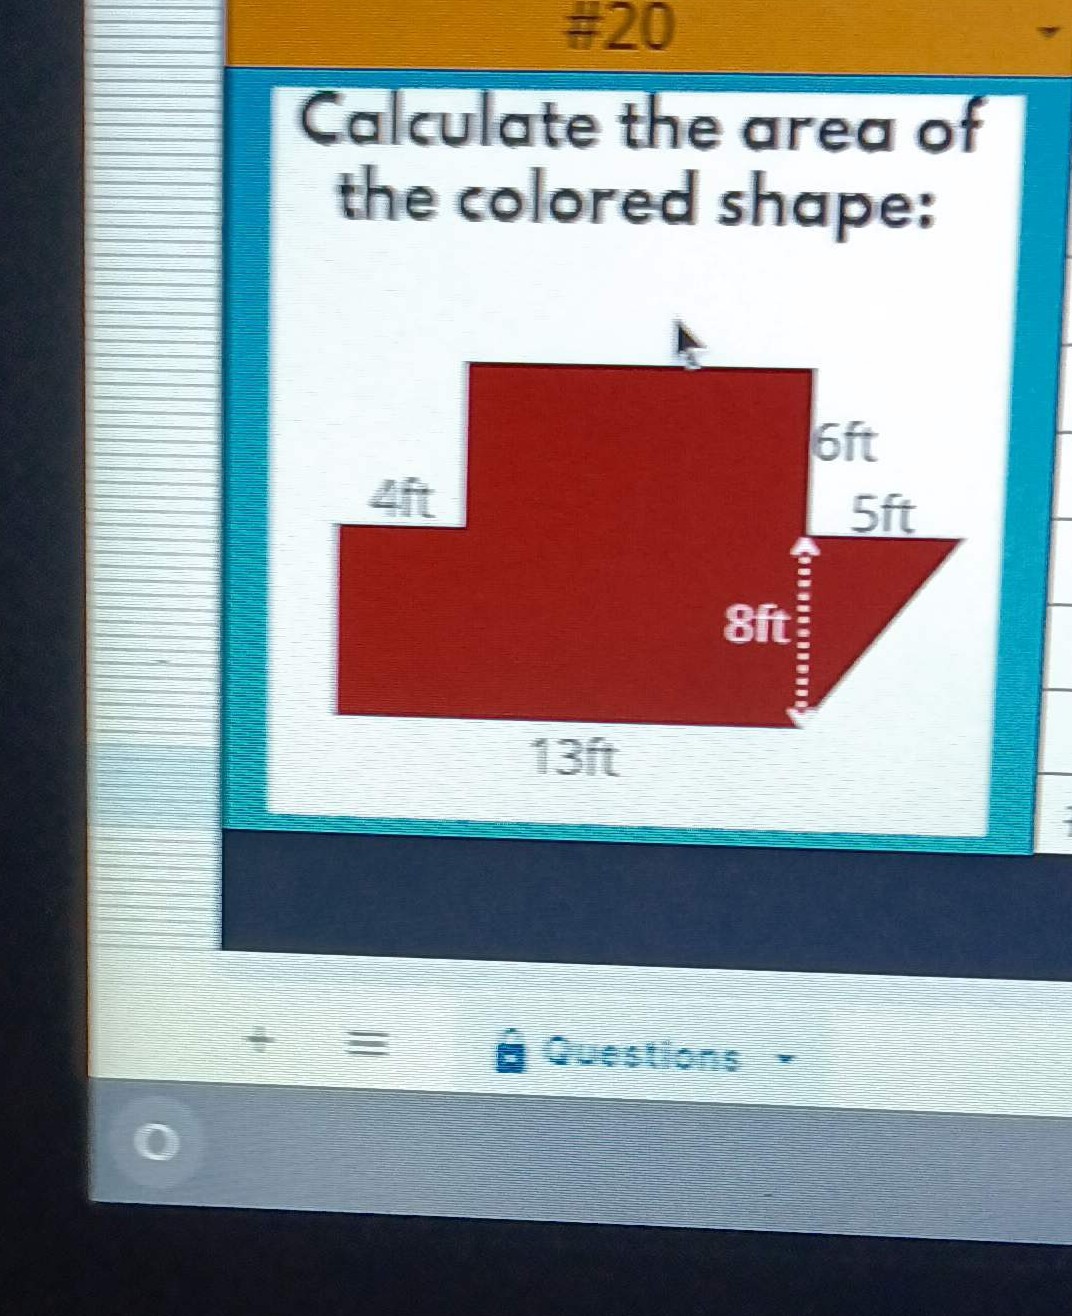 #20
Calculate the area of
the colored shape:
6ft
Aft
5ft
8ft
13ft
Questions